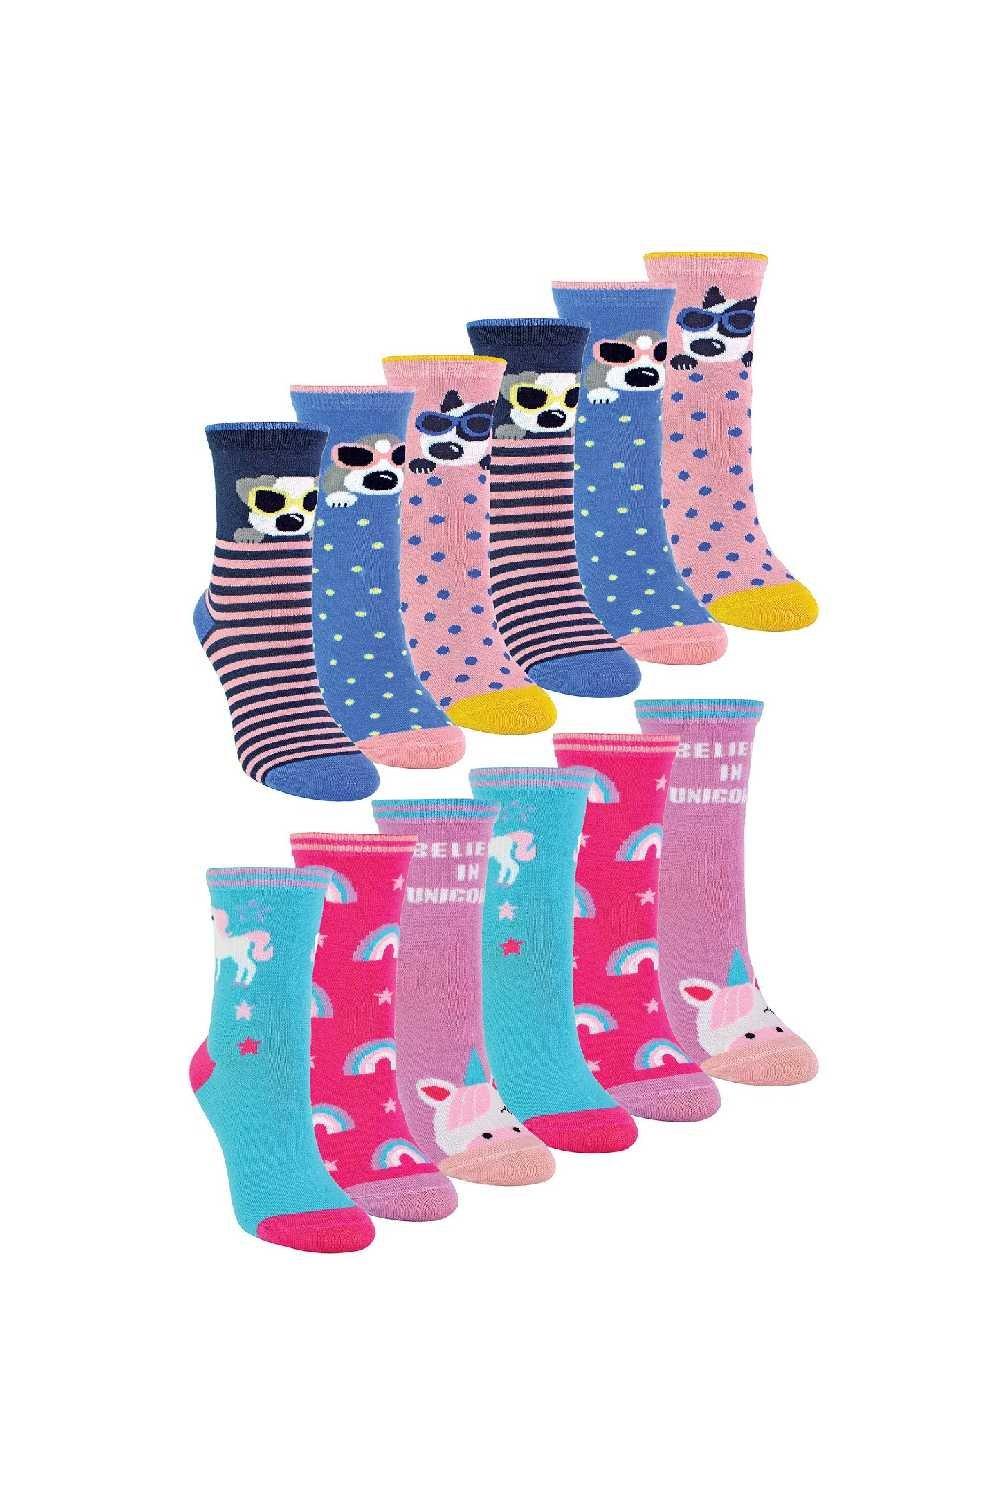 12 Pair Novelty Bamboo Trainer Low Cut Socks with Fun Designs